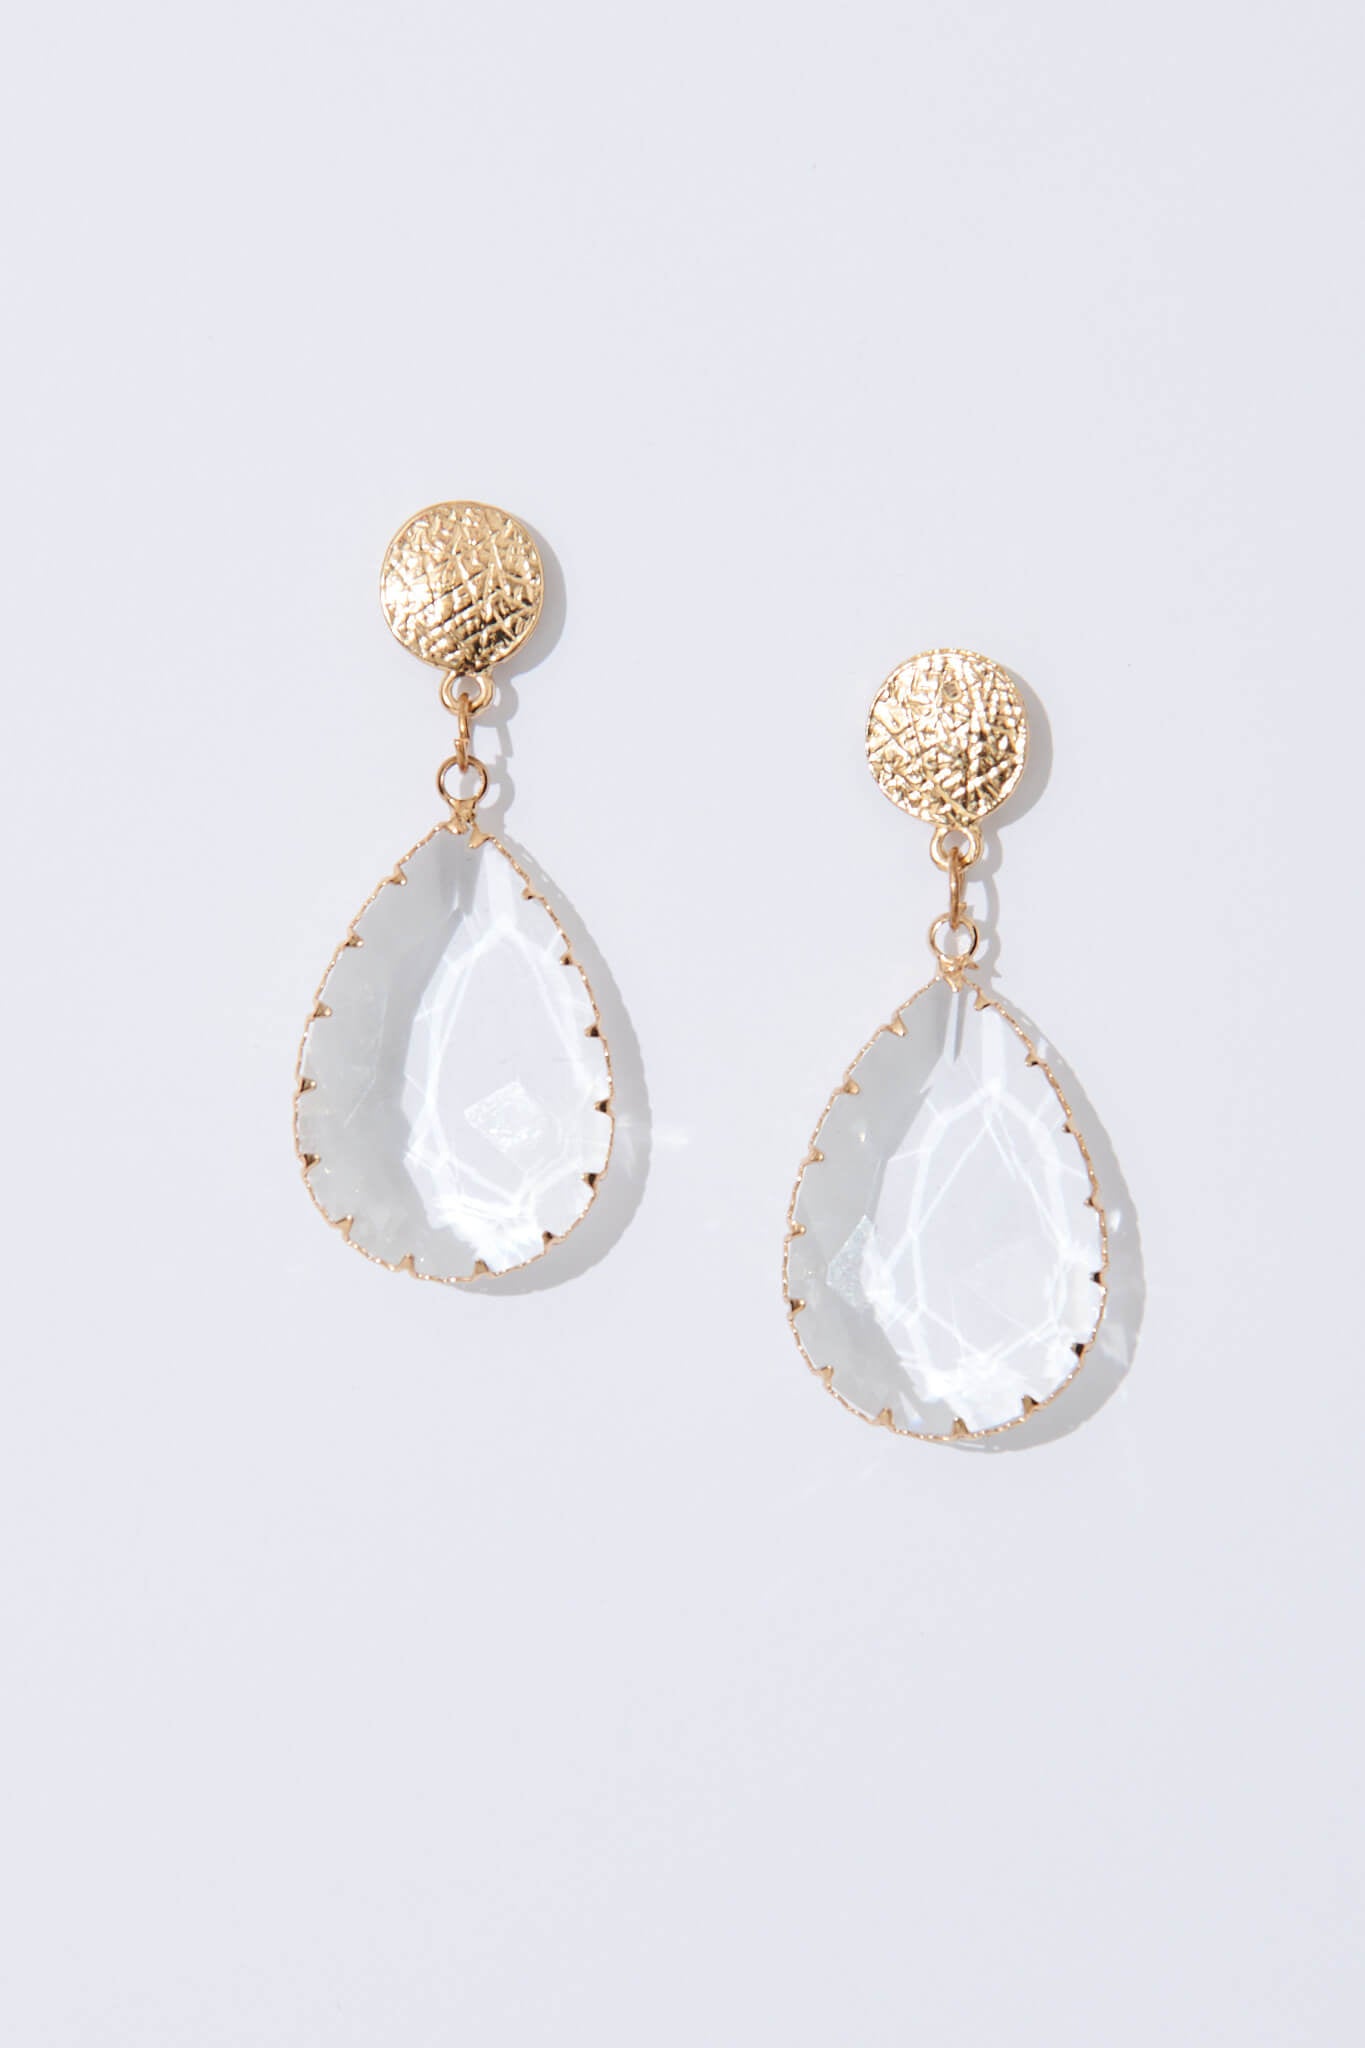 August + Delilah Harriet Drop Earrings In Gold With Transparent Stone - flatlay